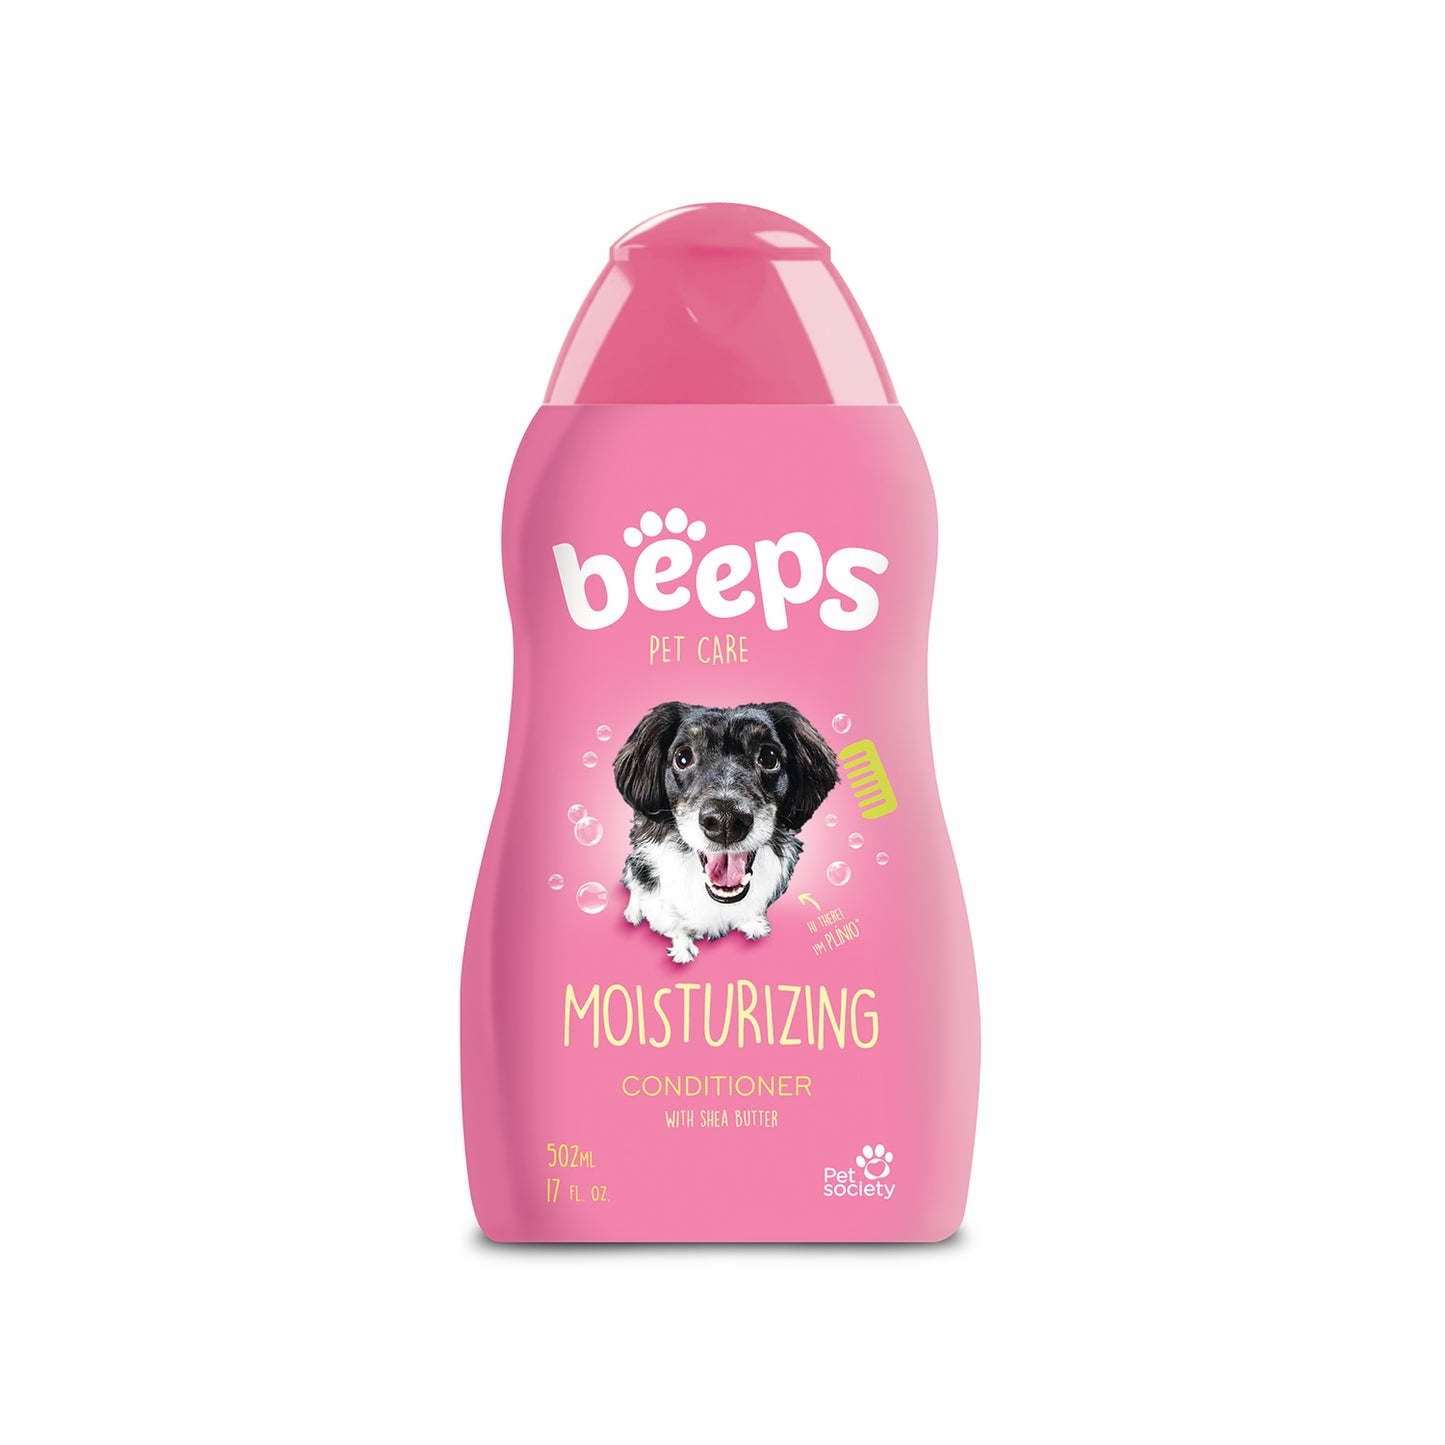 Beeps - Moisturizing Conditioner For Dogs